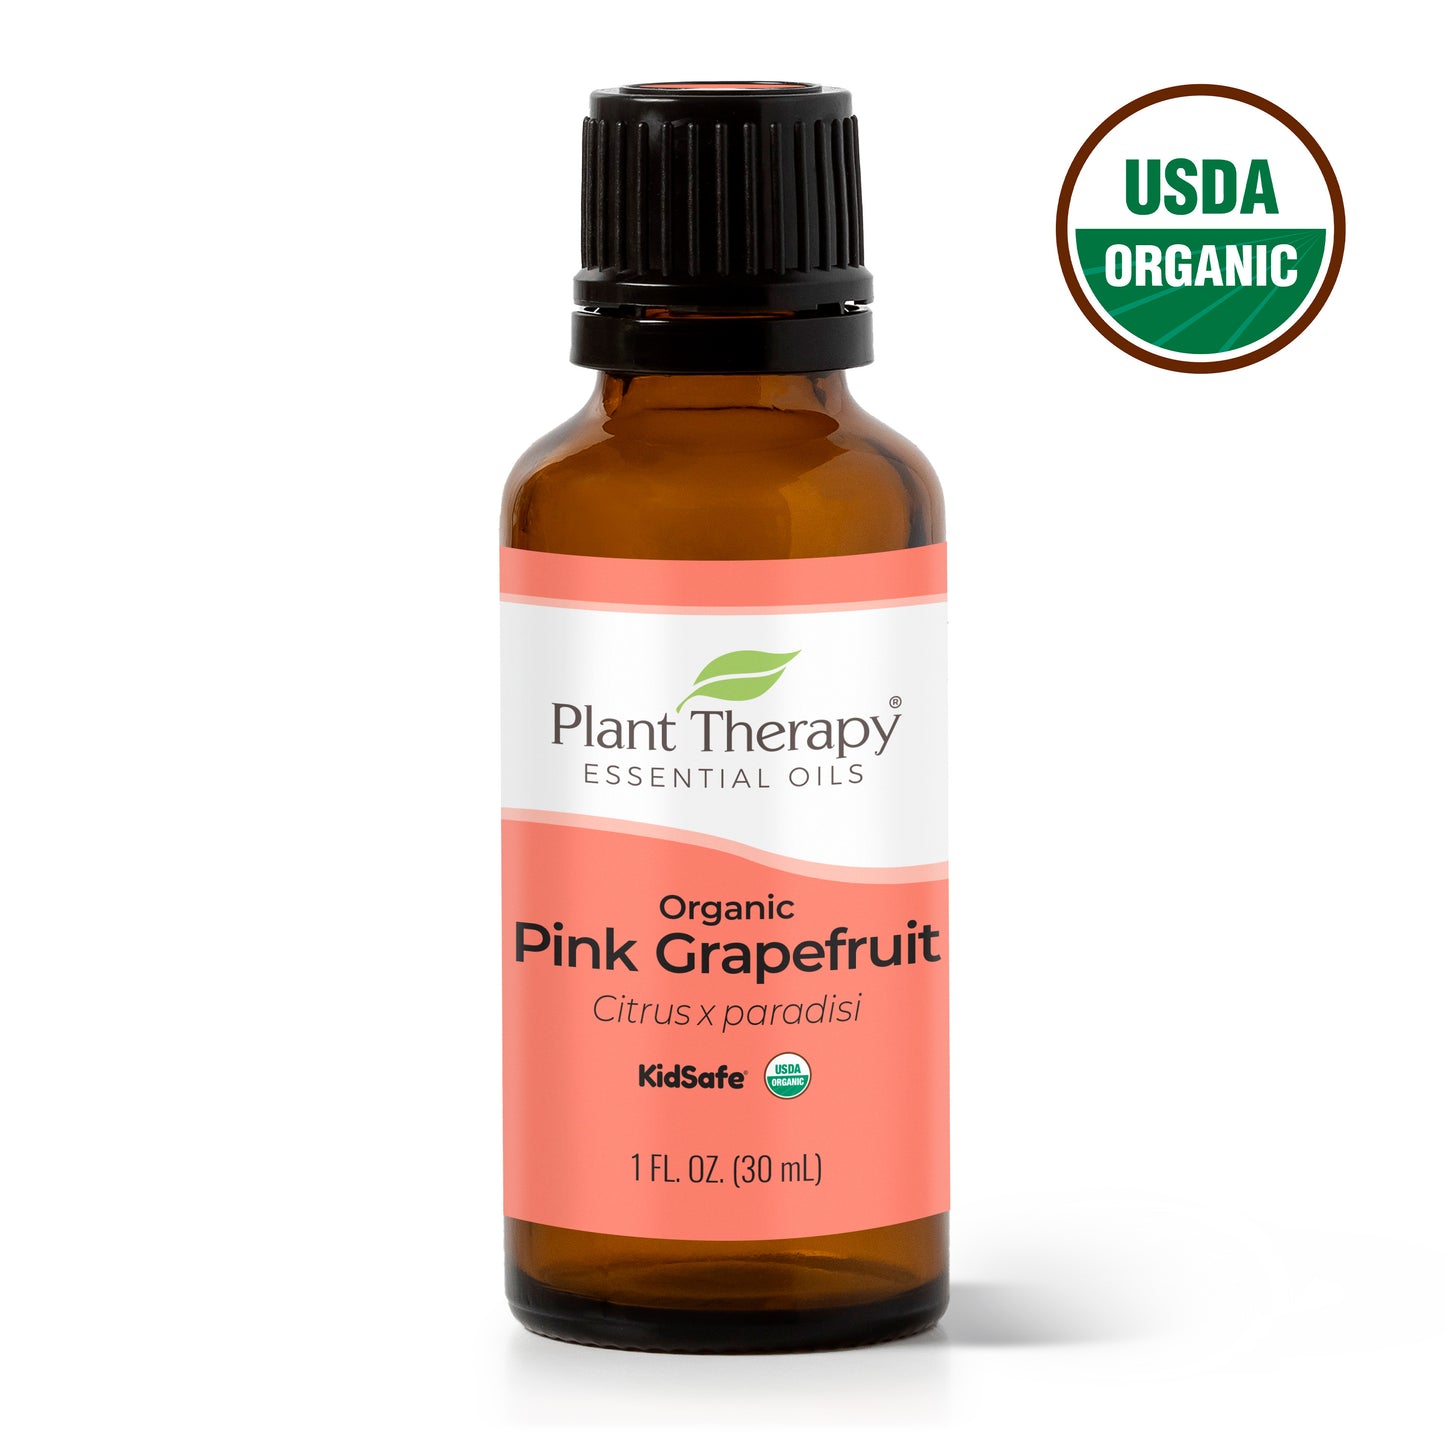 Plant Therapy Sparkling Grapefruit Laundry Essential Oil Blend 10 ml (1/3 oz) PU